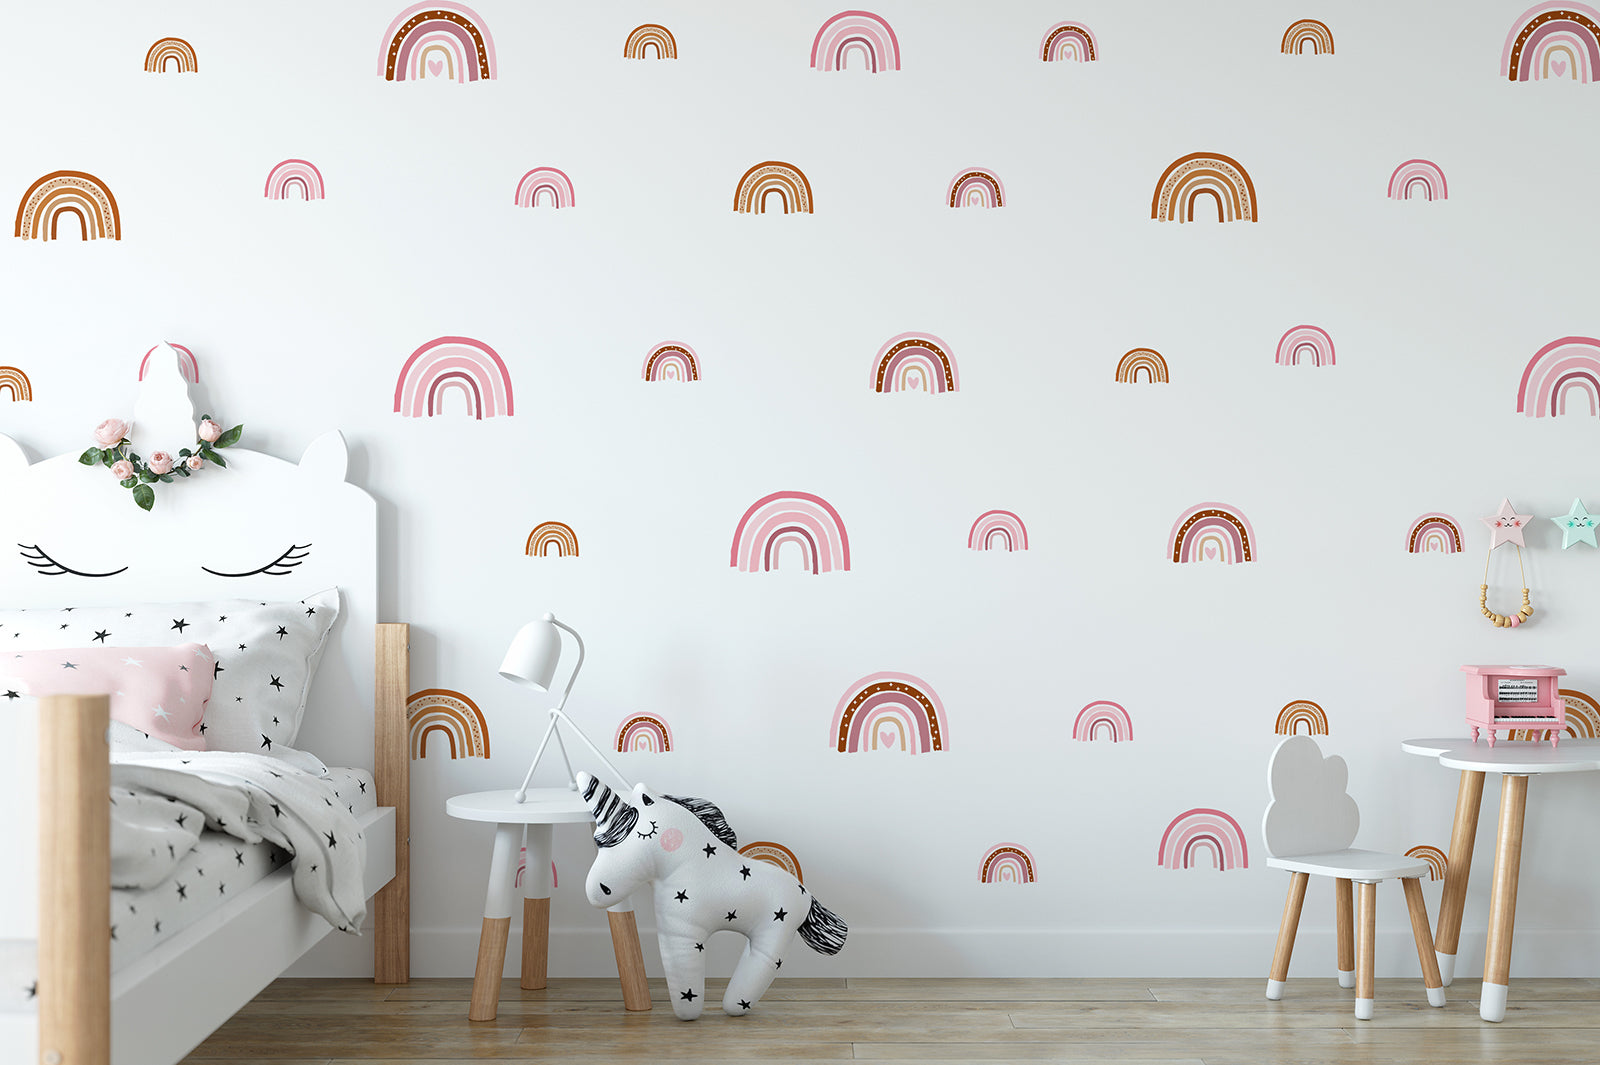 Small rainbow wall decals 